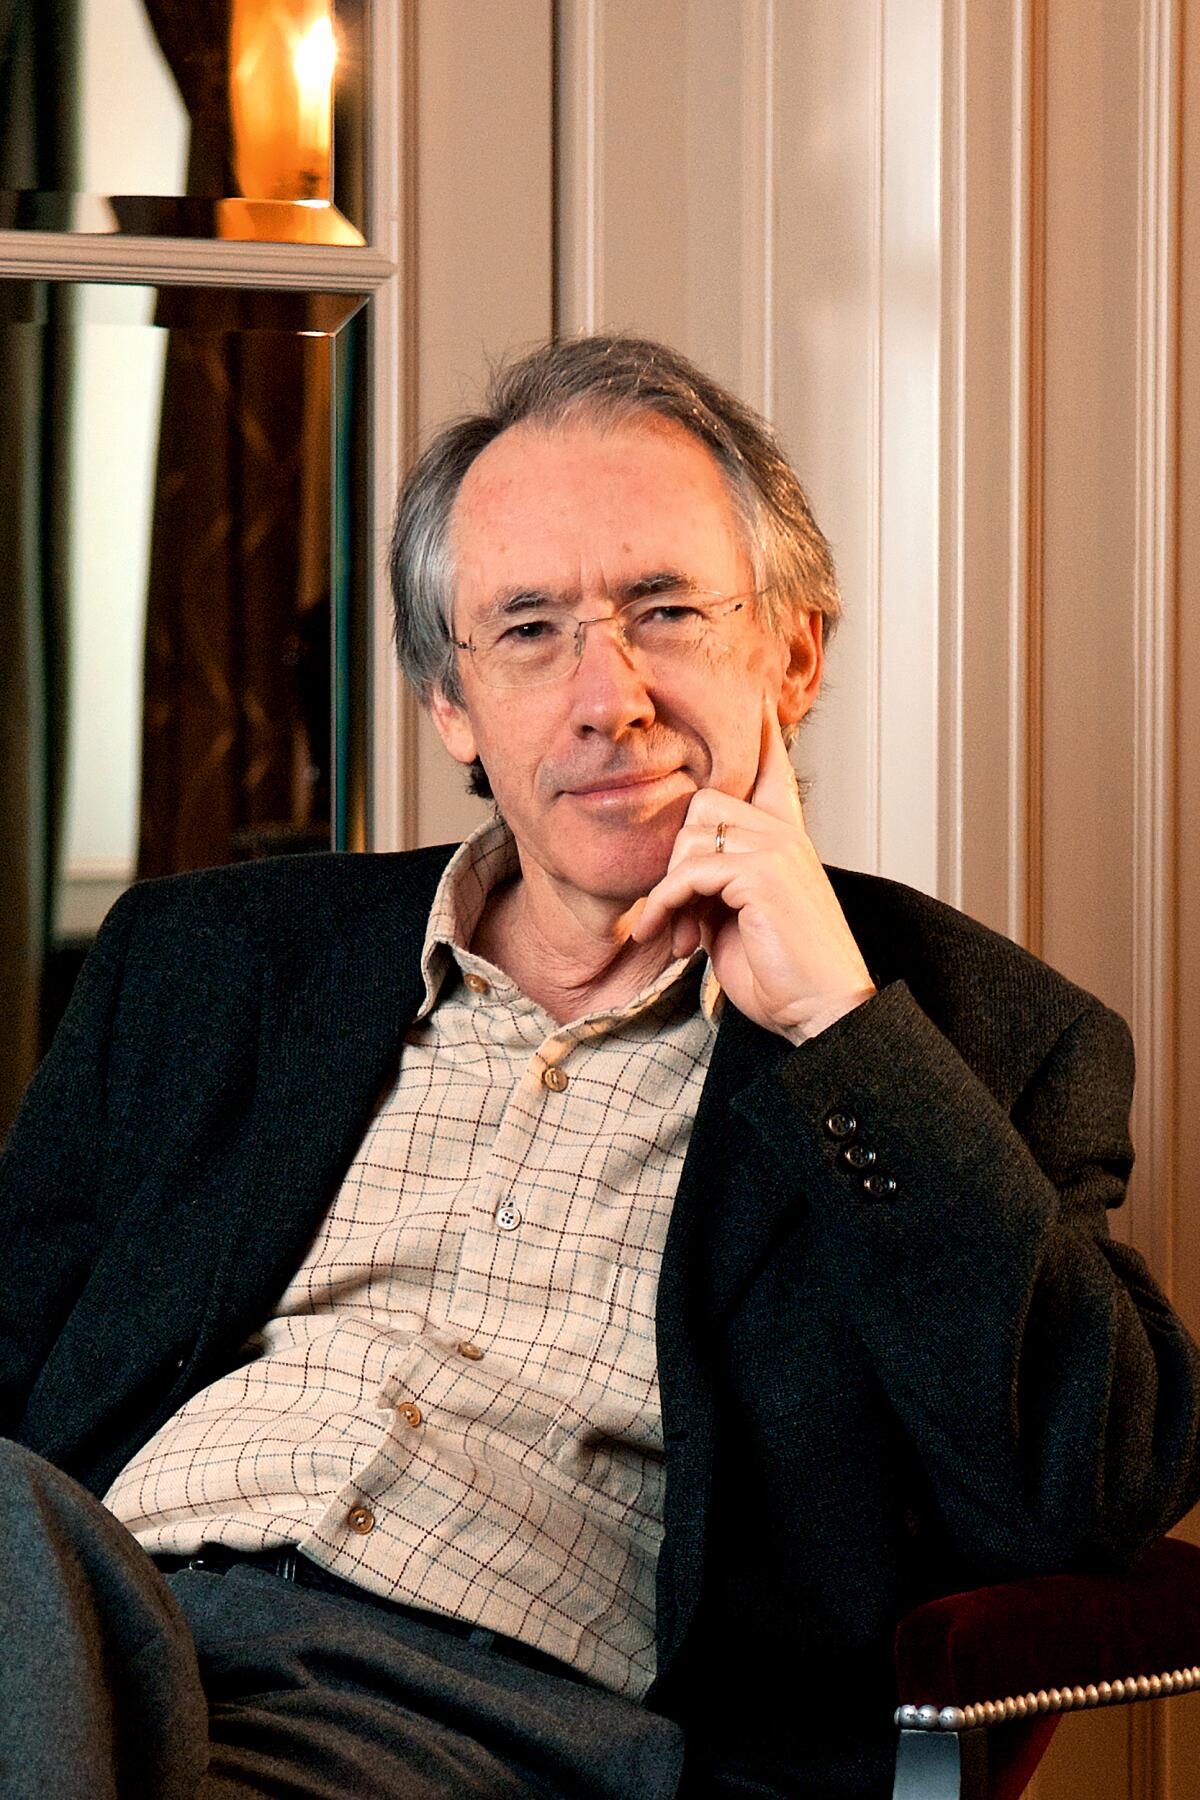 Ian McEwan's latest novel, "Lessons," is his largest in scope and in many ways, he says, his most personal.